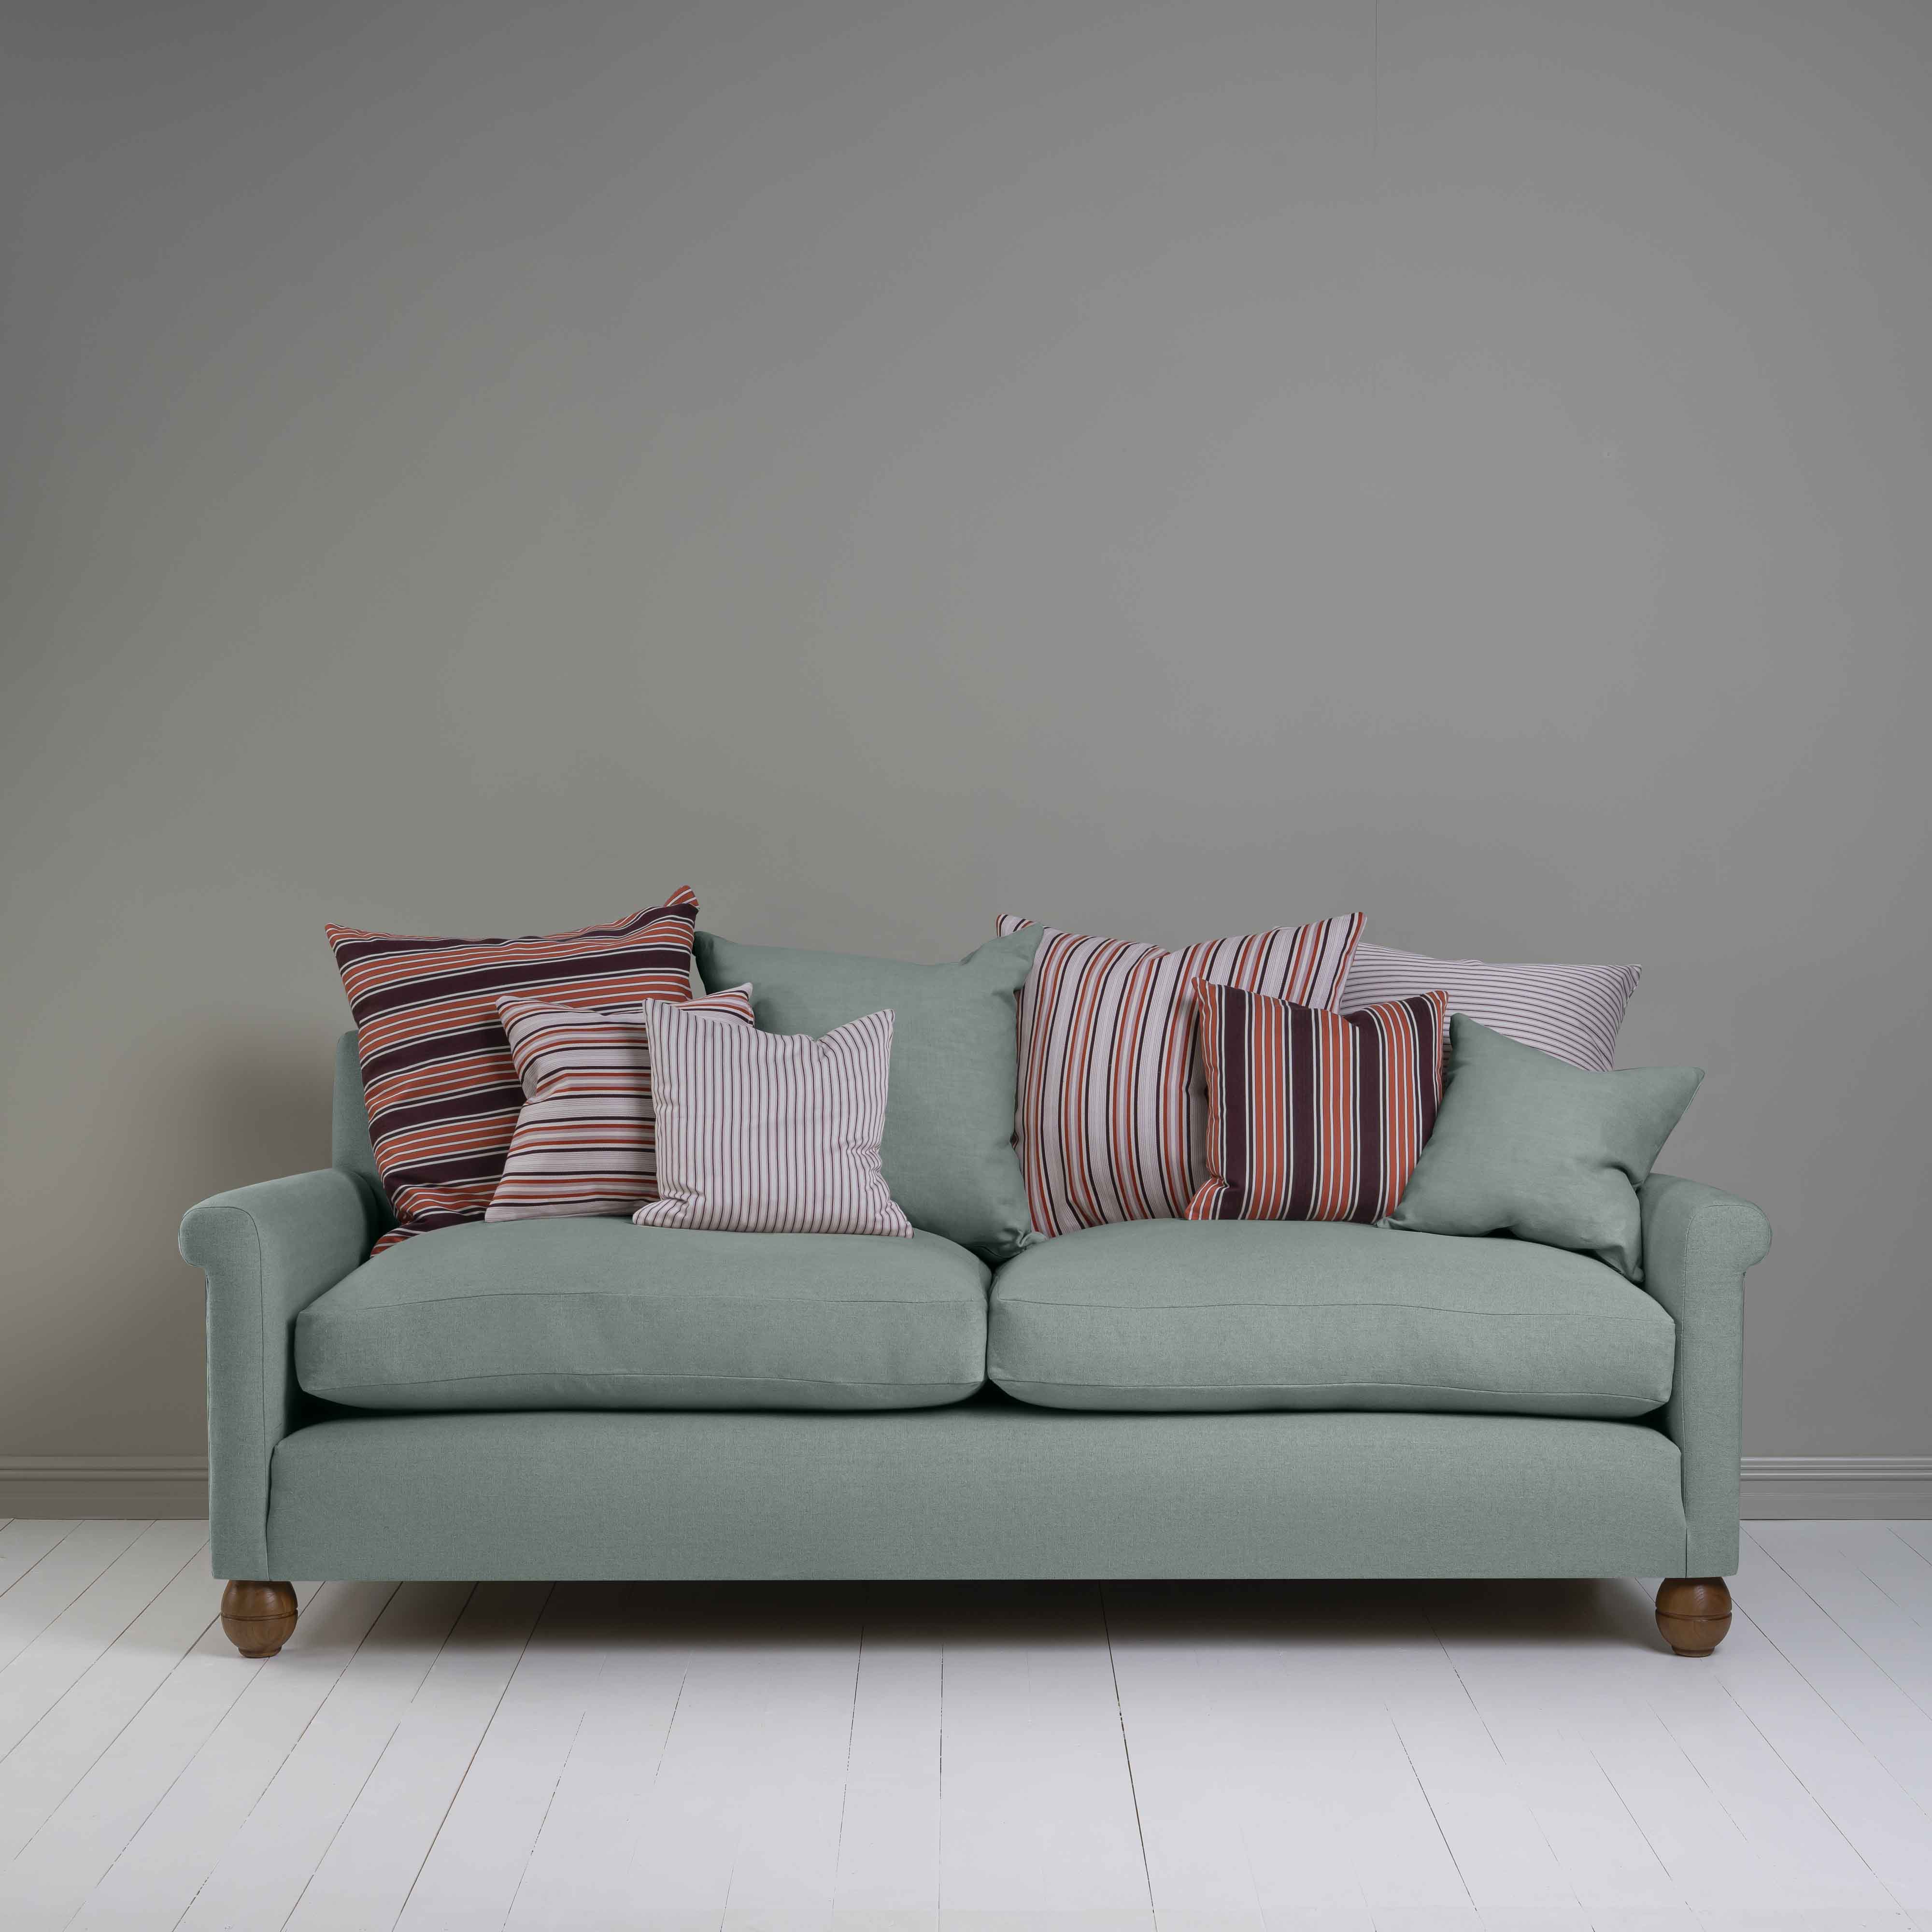  Idler 4 seater sofa in Laidback Linen Mineral 